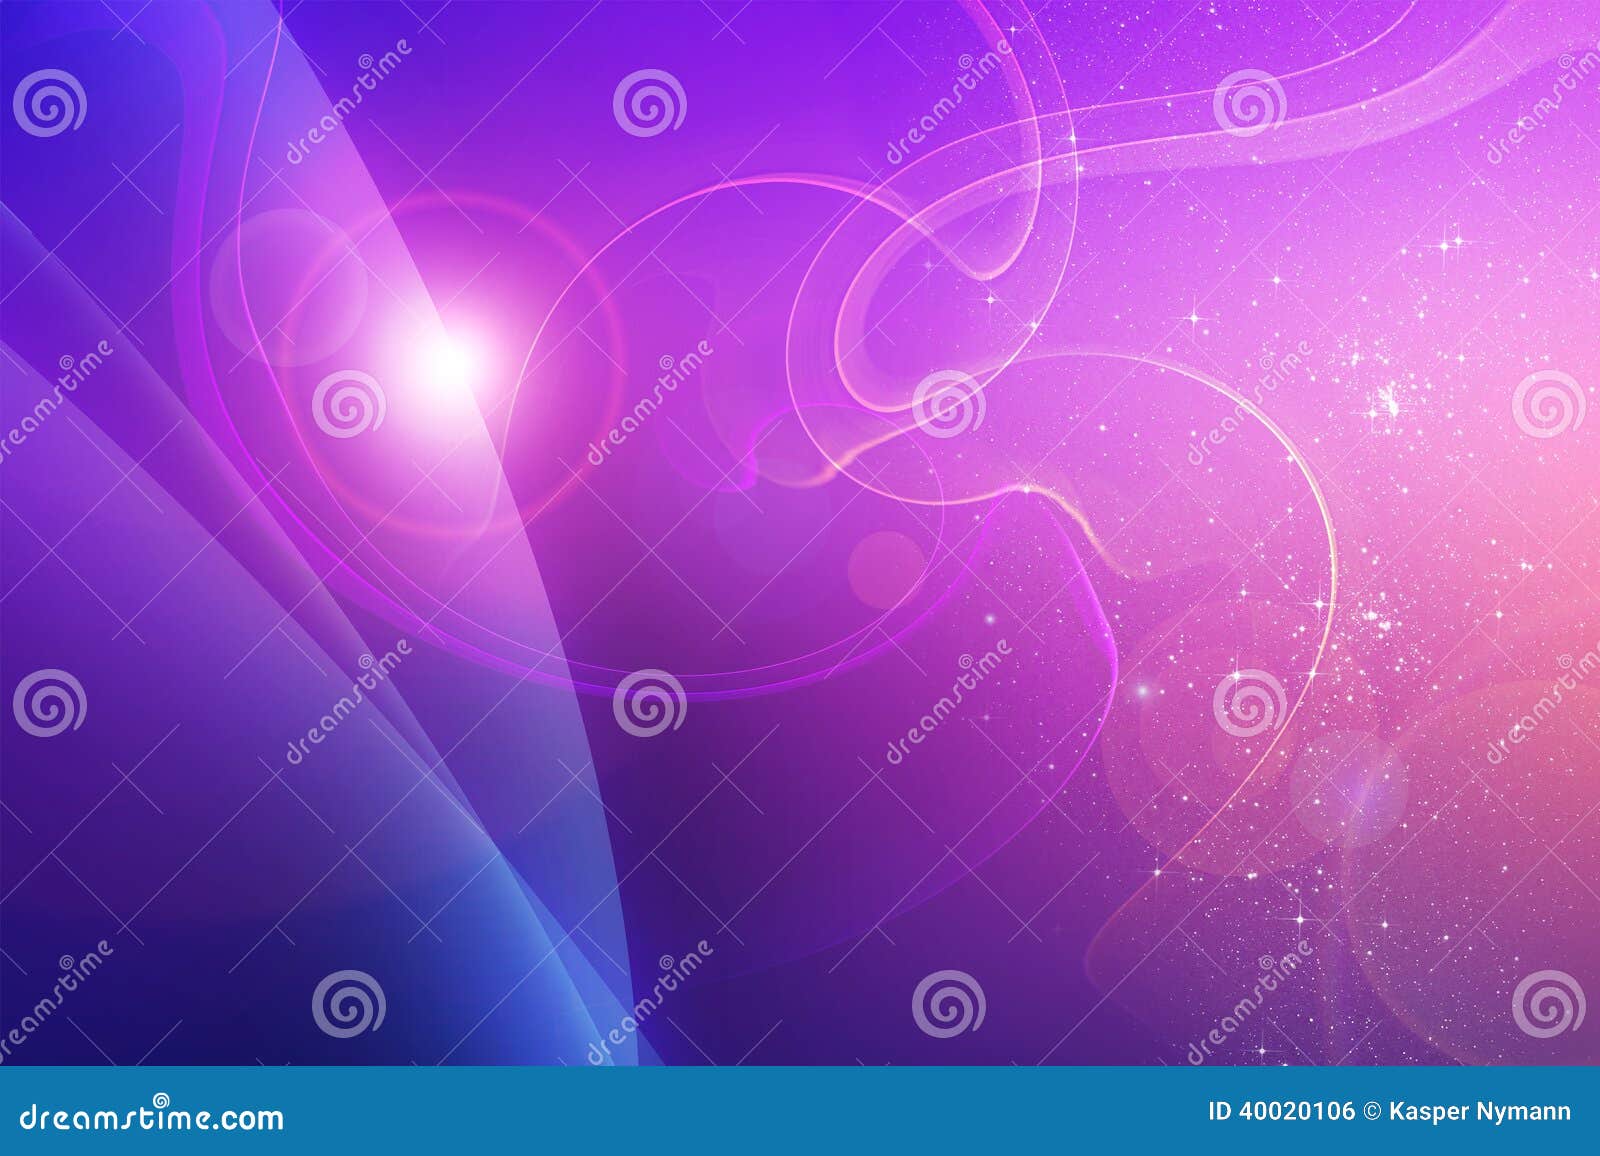 Colorful Science Fiction Background With Bright Lights 